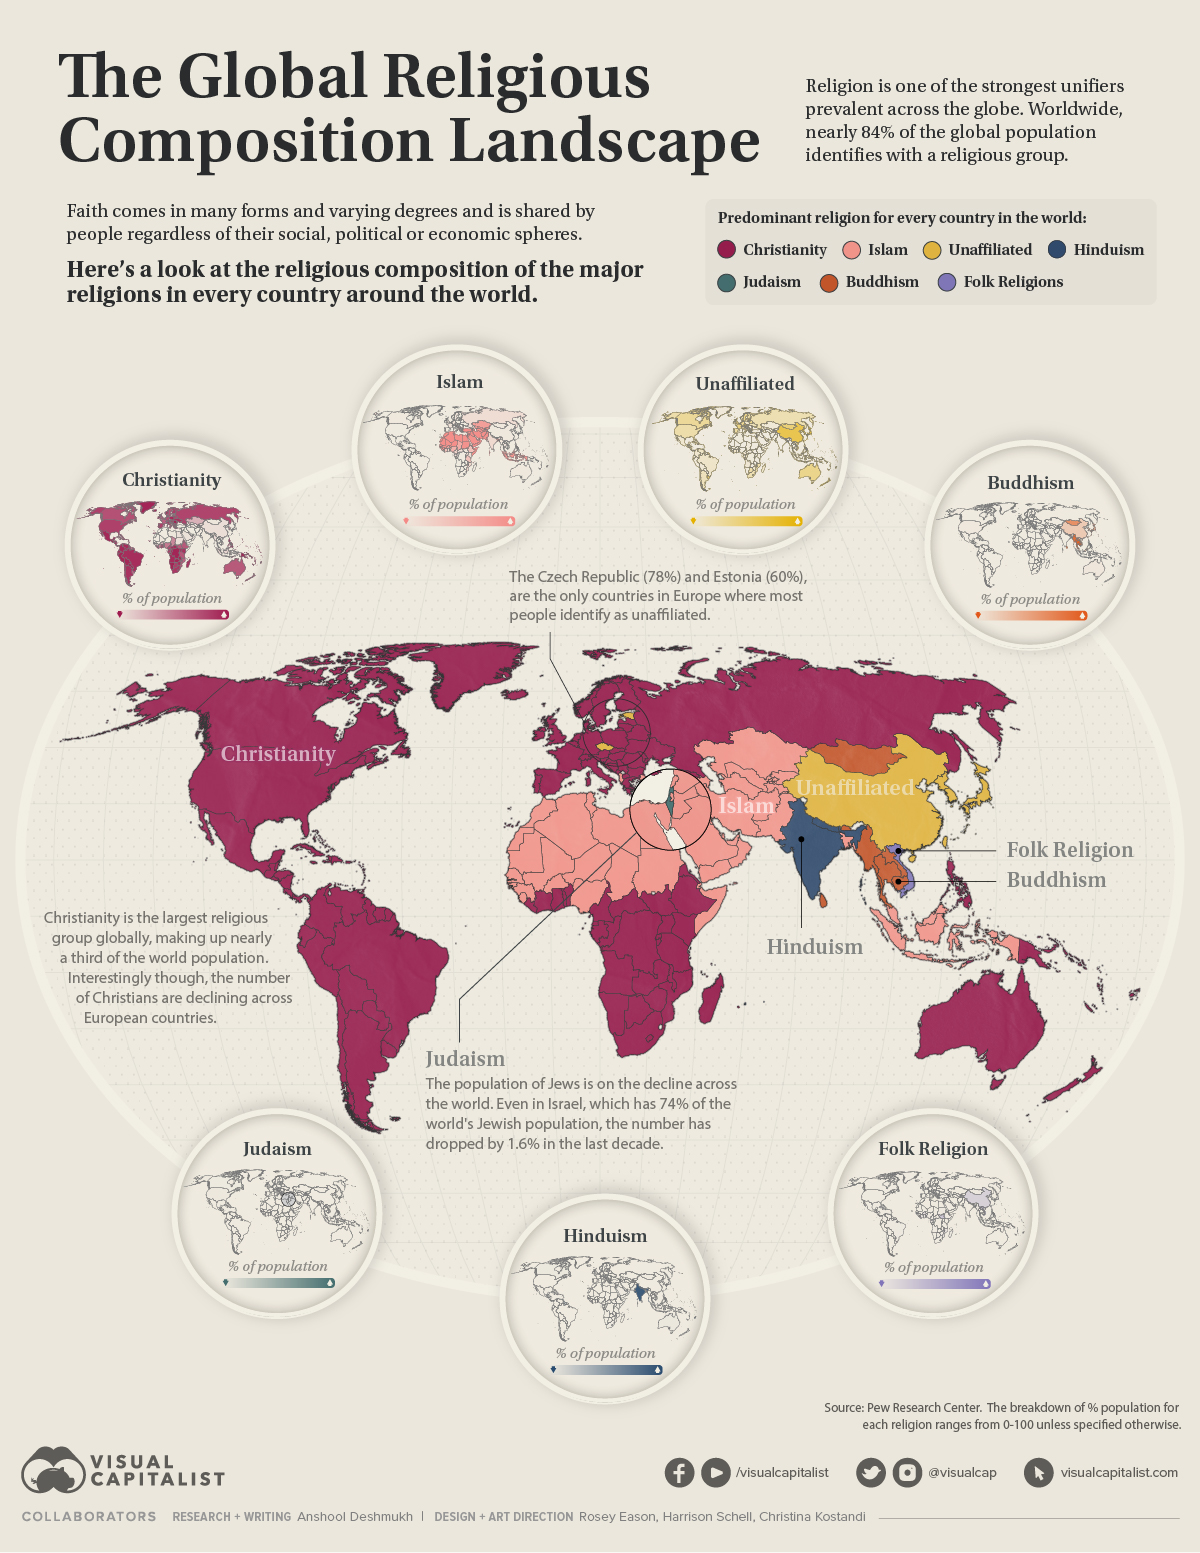 Map of the religious composition around the world